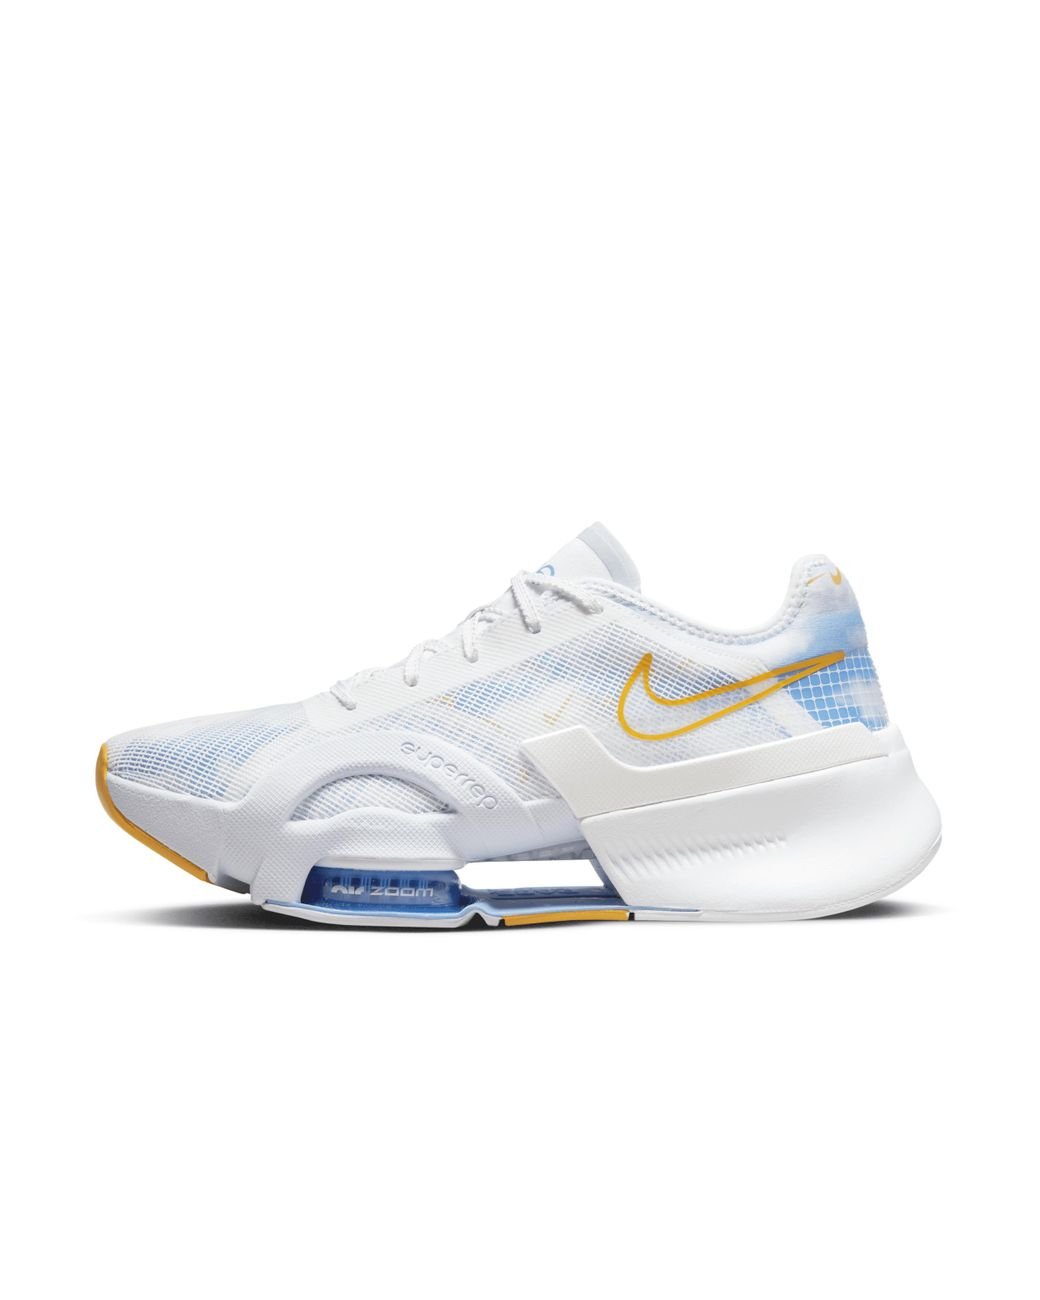 Nike Air Zoom Superrep 3 Amp Training Shoes In White, in Blue | Lyst